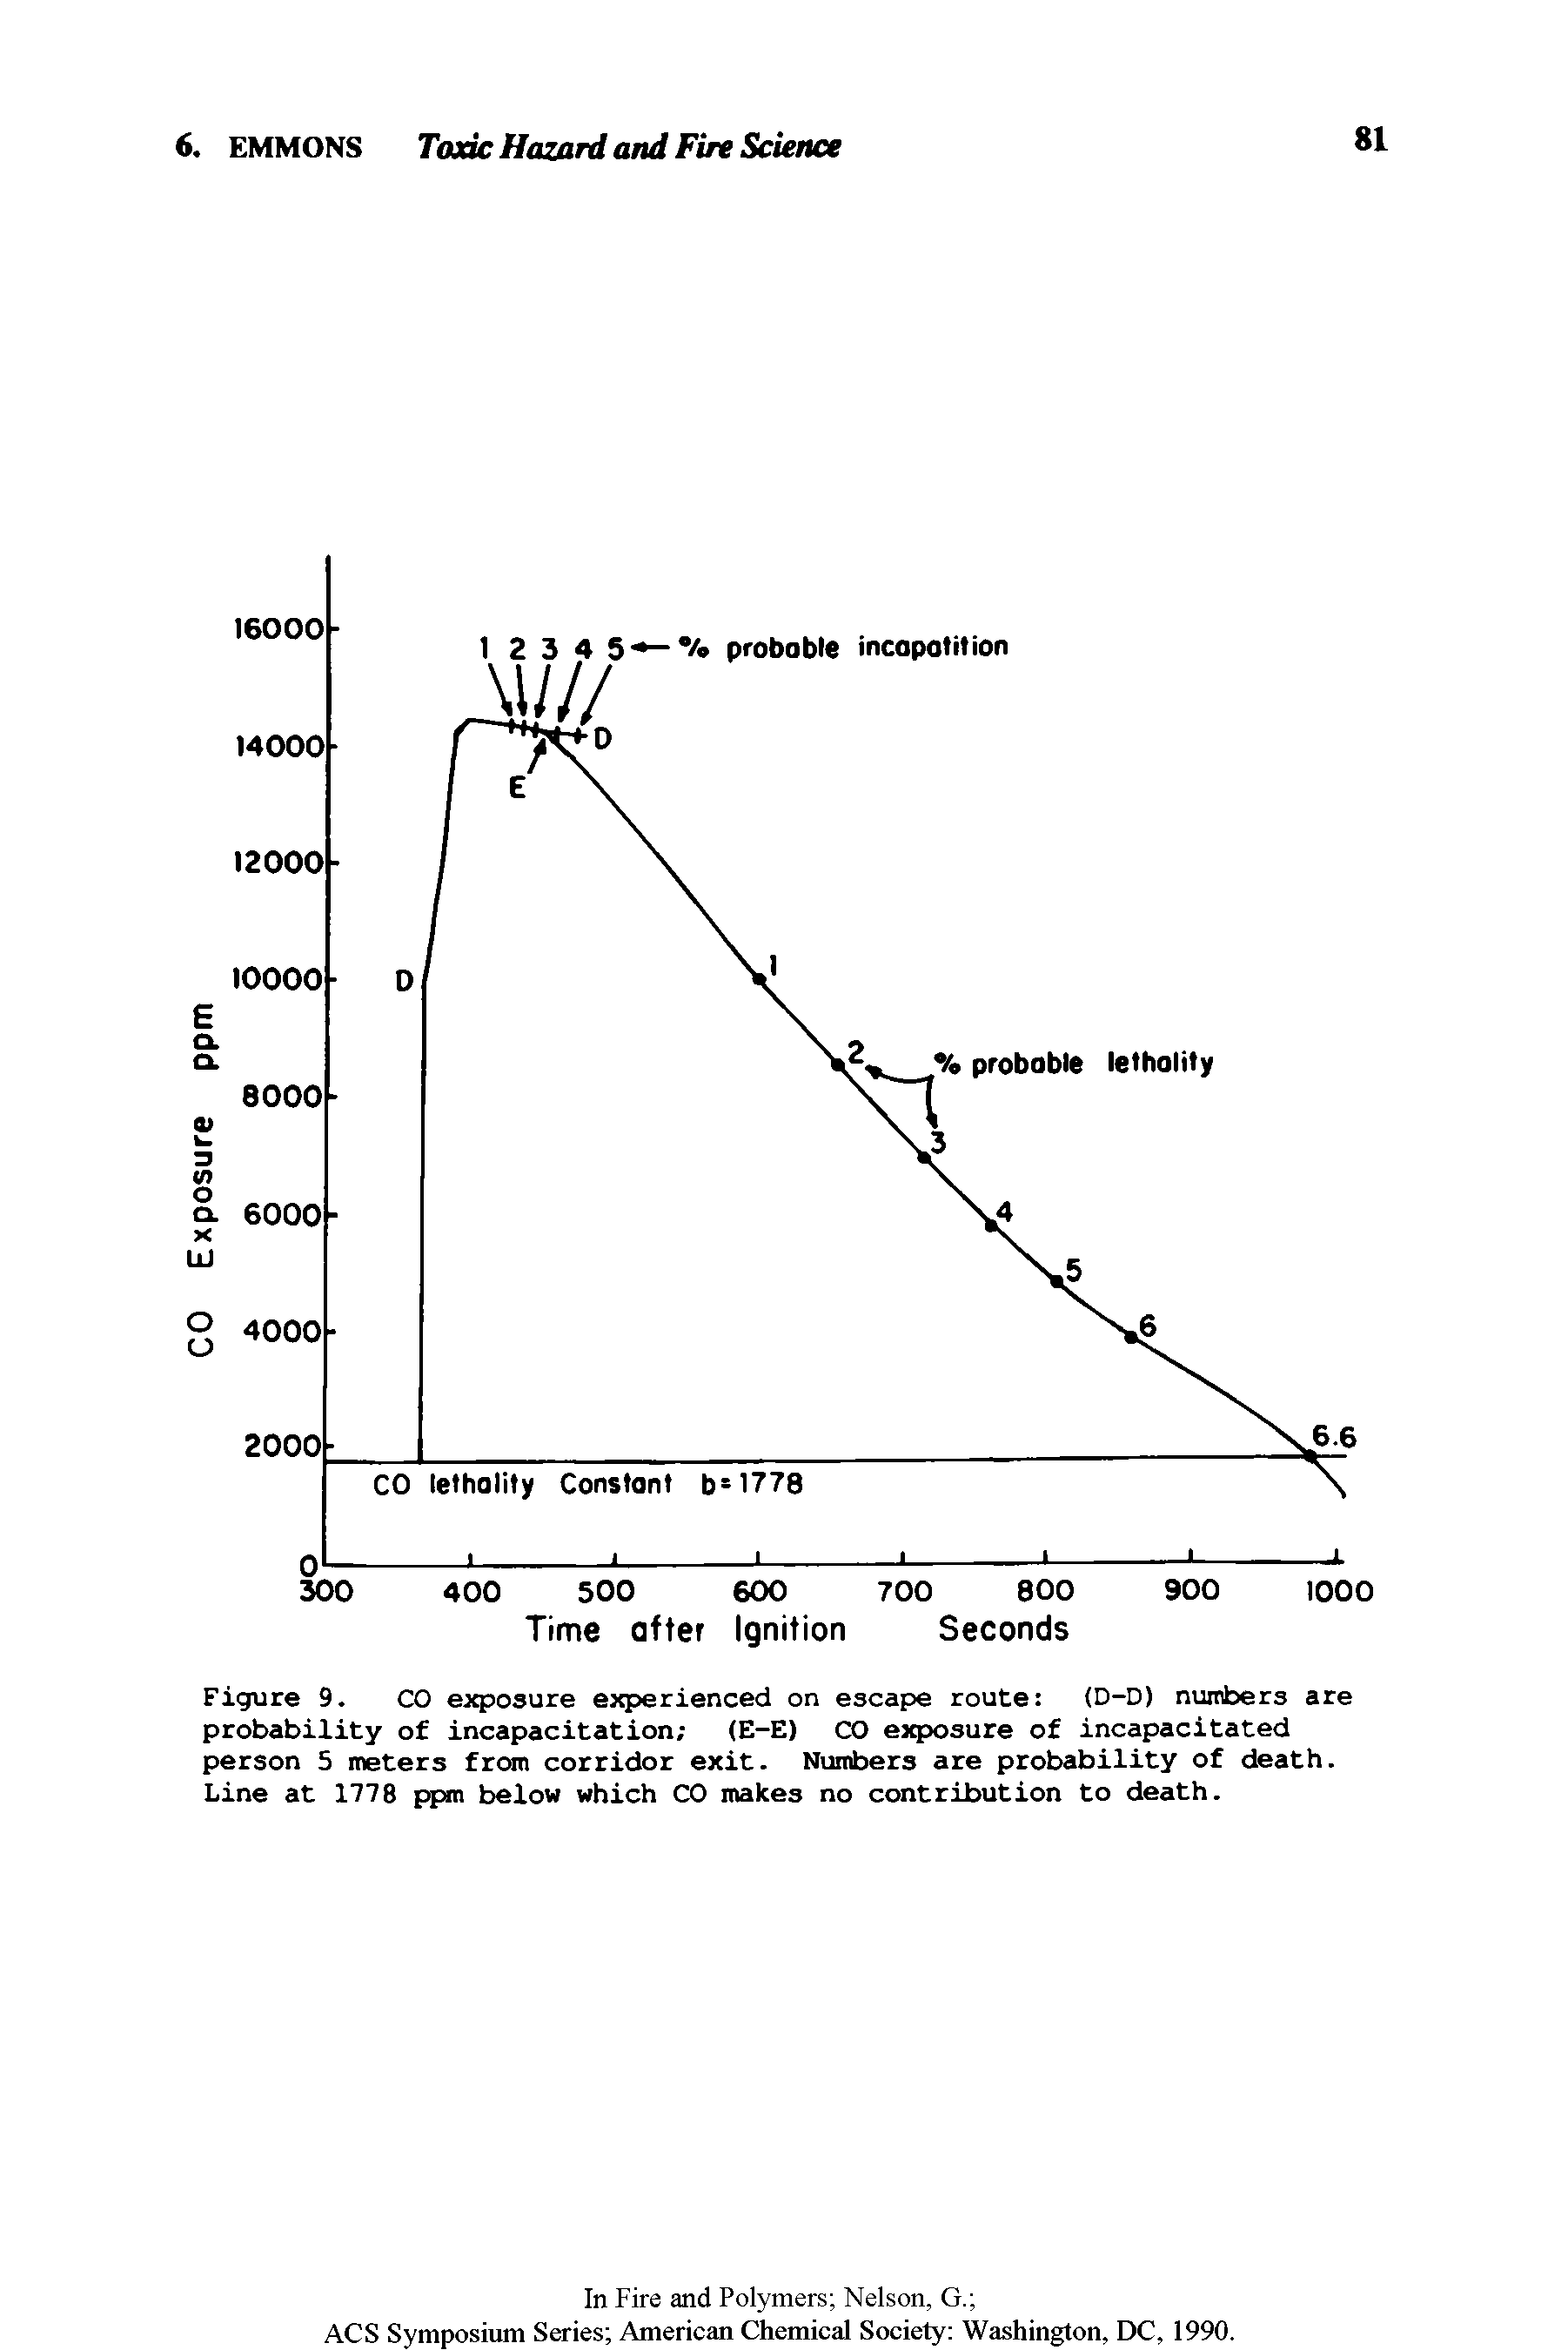 Figure 9. CO exposure experienced on escape route (D-D) numbers are probability of incapacitation (E-E) CO exposure of incapacitated person 5 meters from corridor exit. Numbers are probability of death. Line at 1778 ppm below which CO makes no contribution to death.